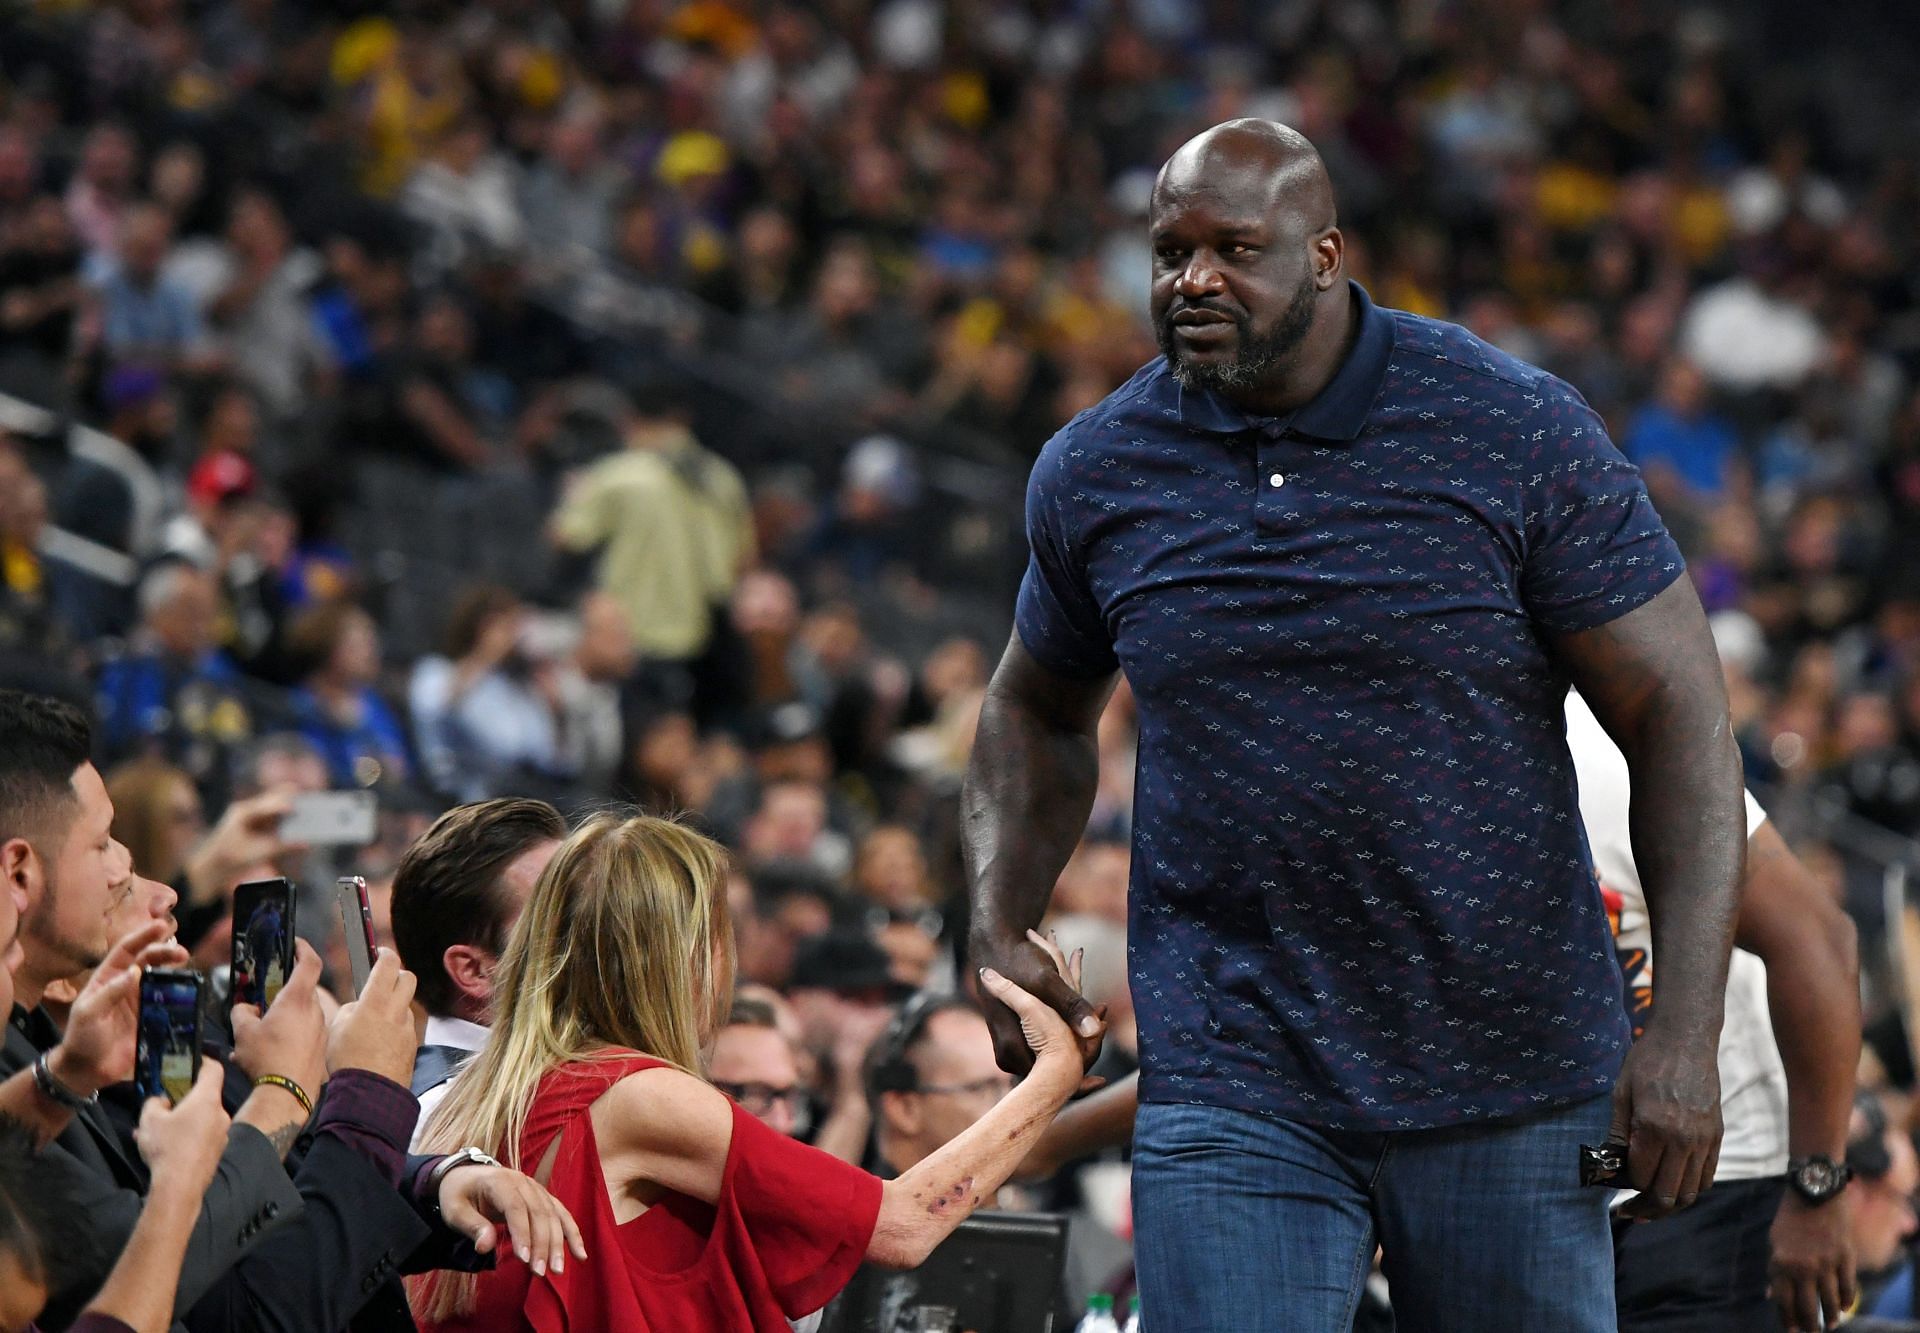 NBA analyst Shaquille O&#039;Neal arrives at a preseason game between the Golden State Warriors and the Los Angeles Lakers at T-Mobile Arena on October 10, 2018 in Las Vegas, Nevada. The Lakers defeated the Warriors 123-113.